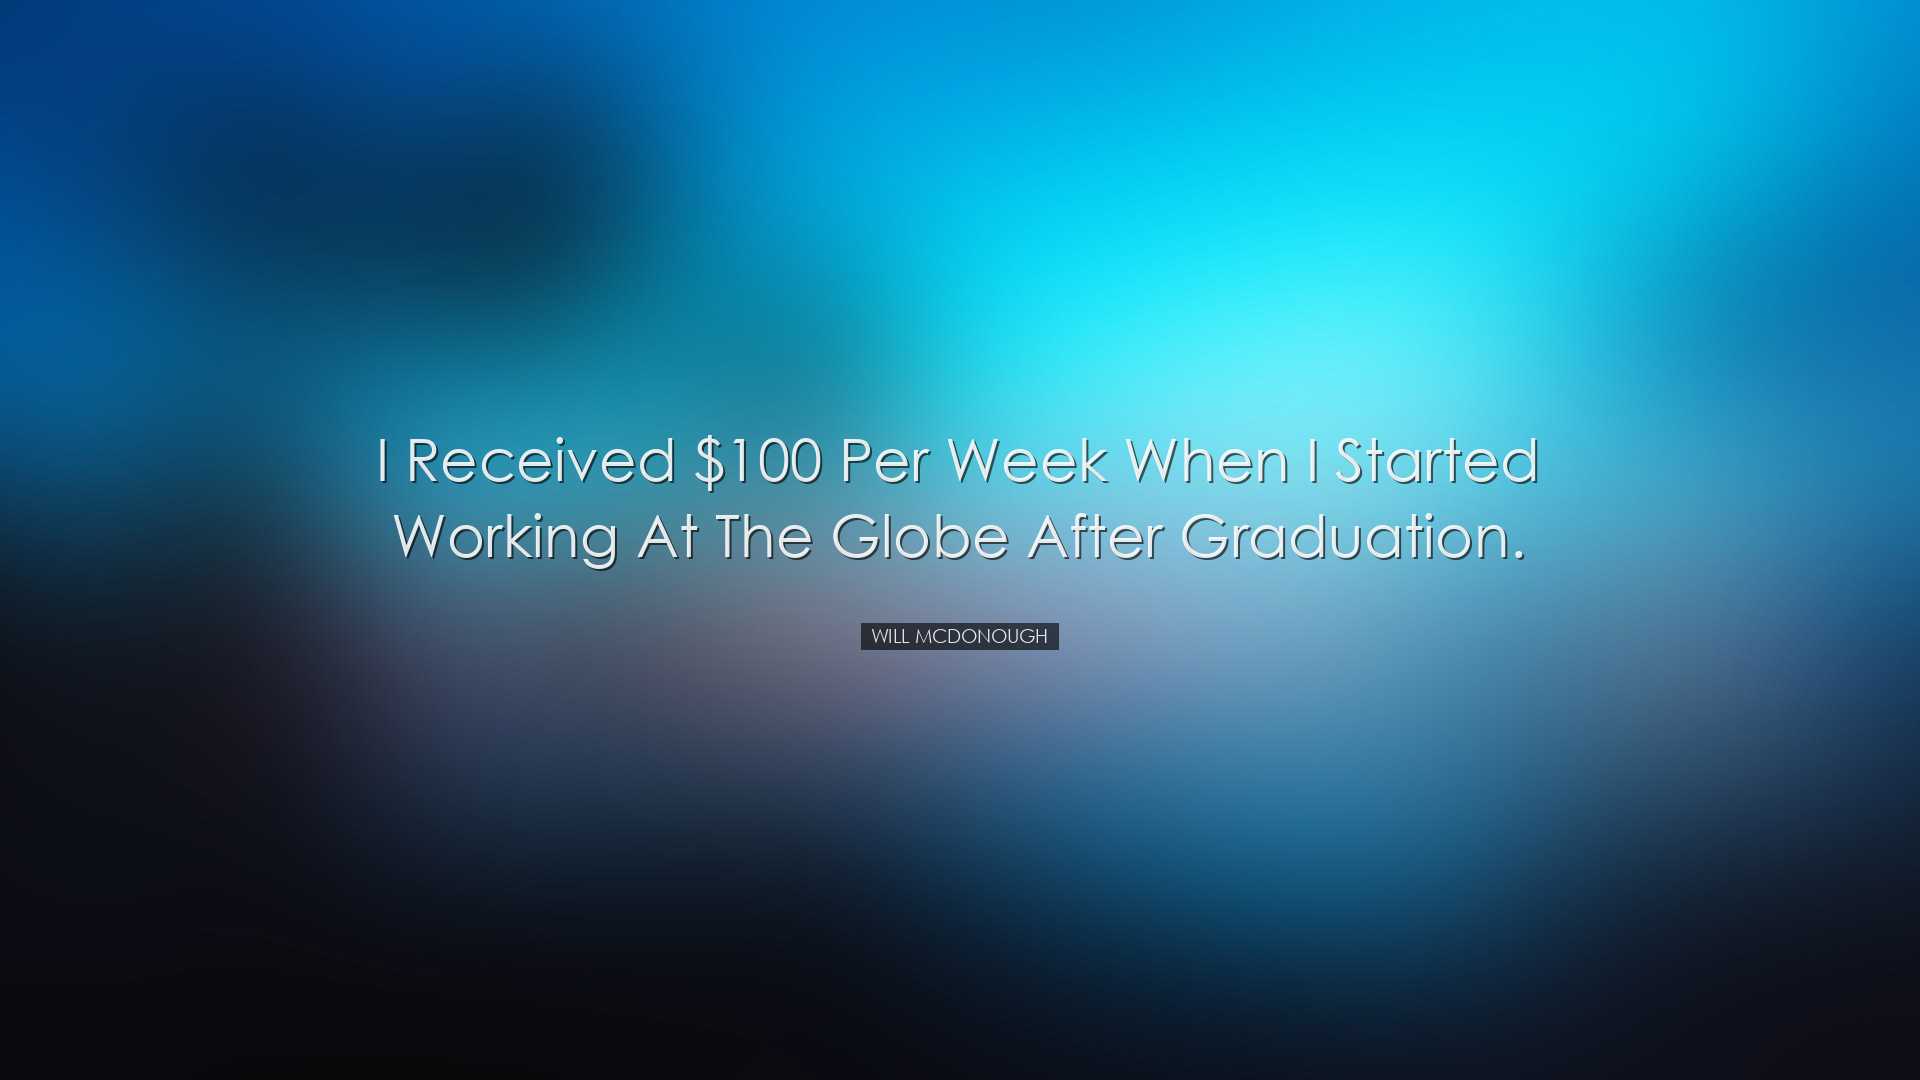 I received $100 per week when I started working at the Globe after